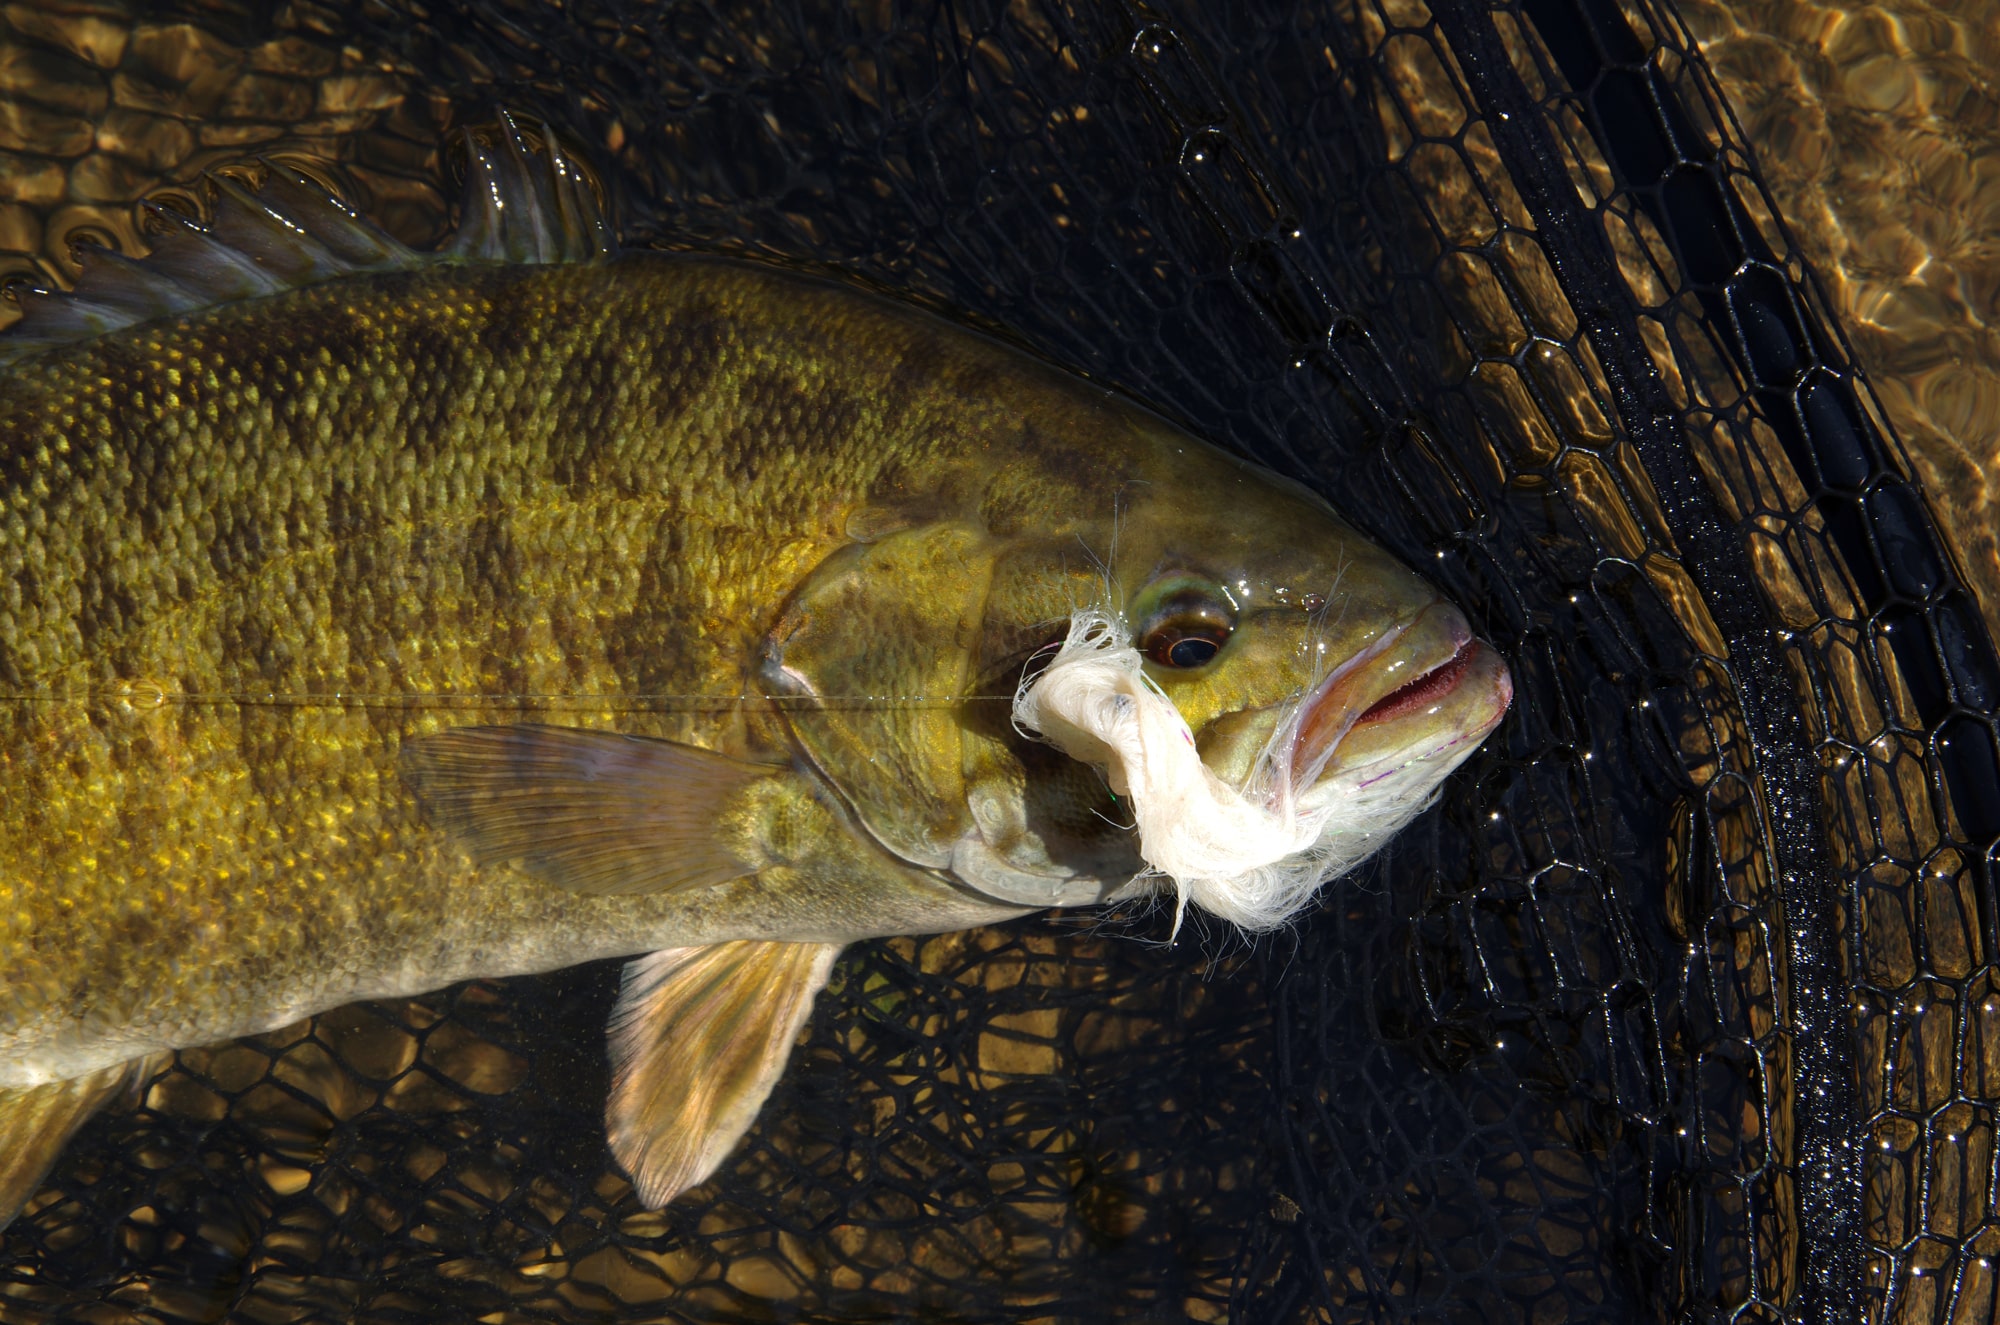 Fly Fishing for Smallmouth Bass Digital Download